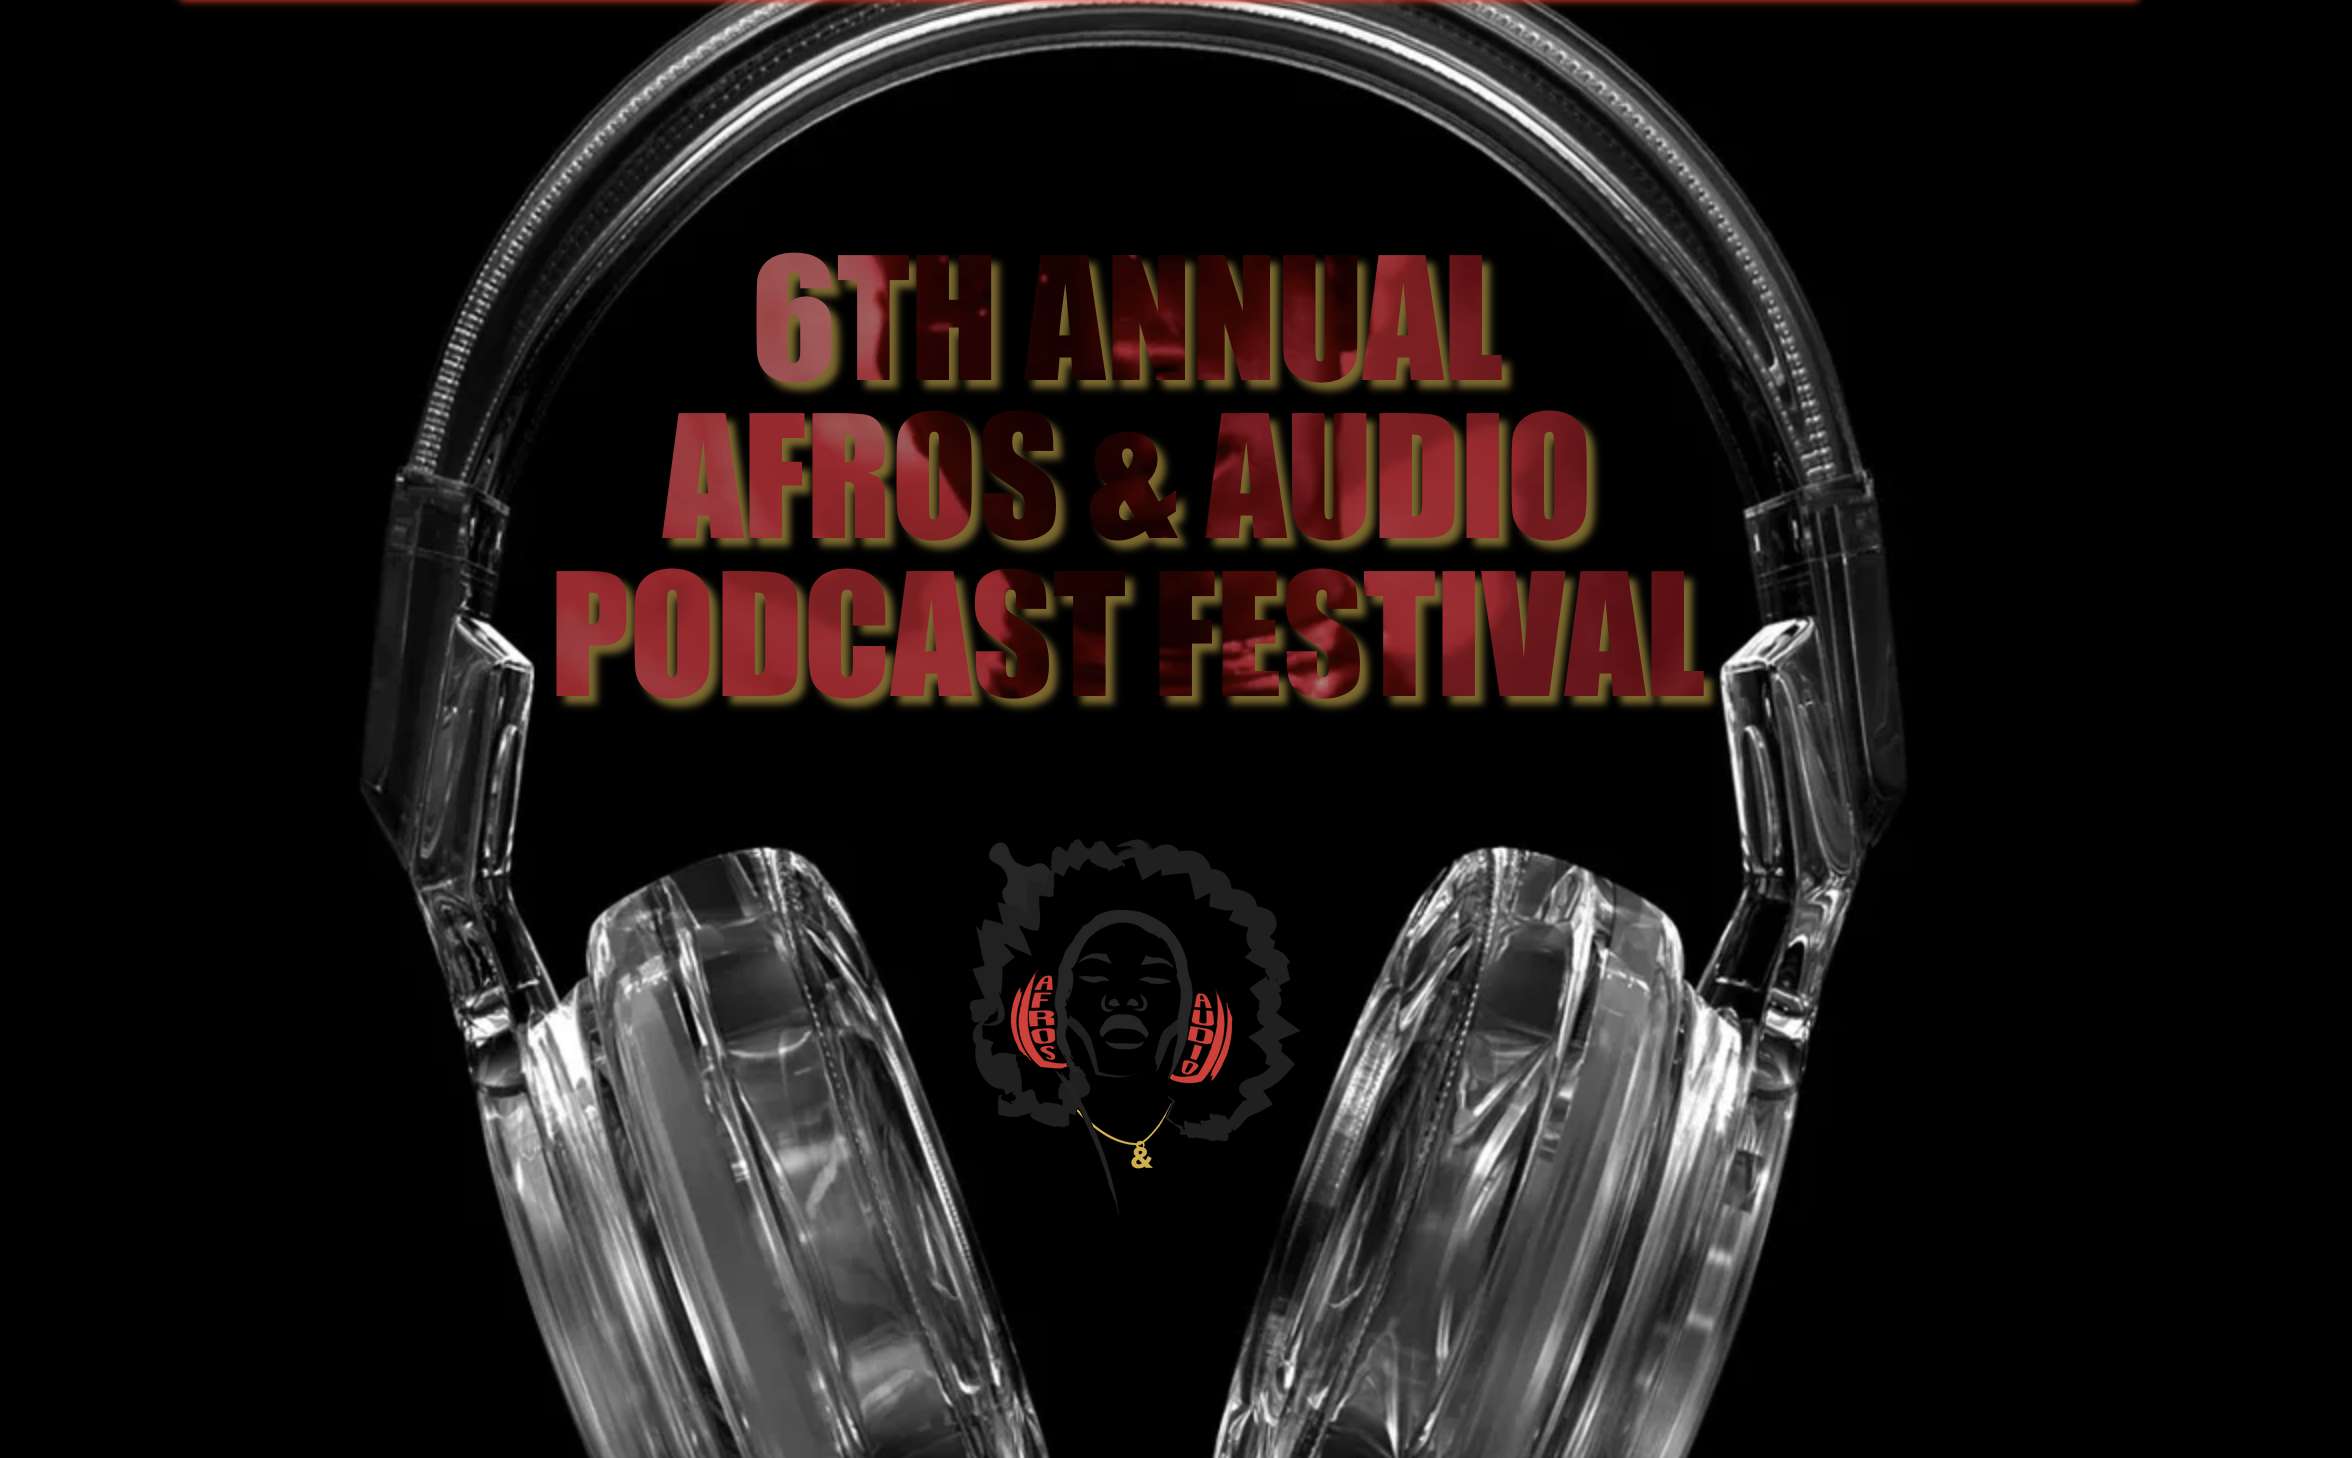 Afros and audio festival